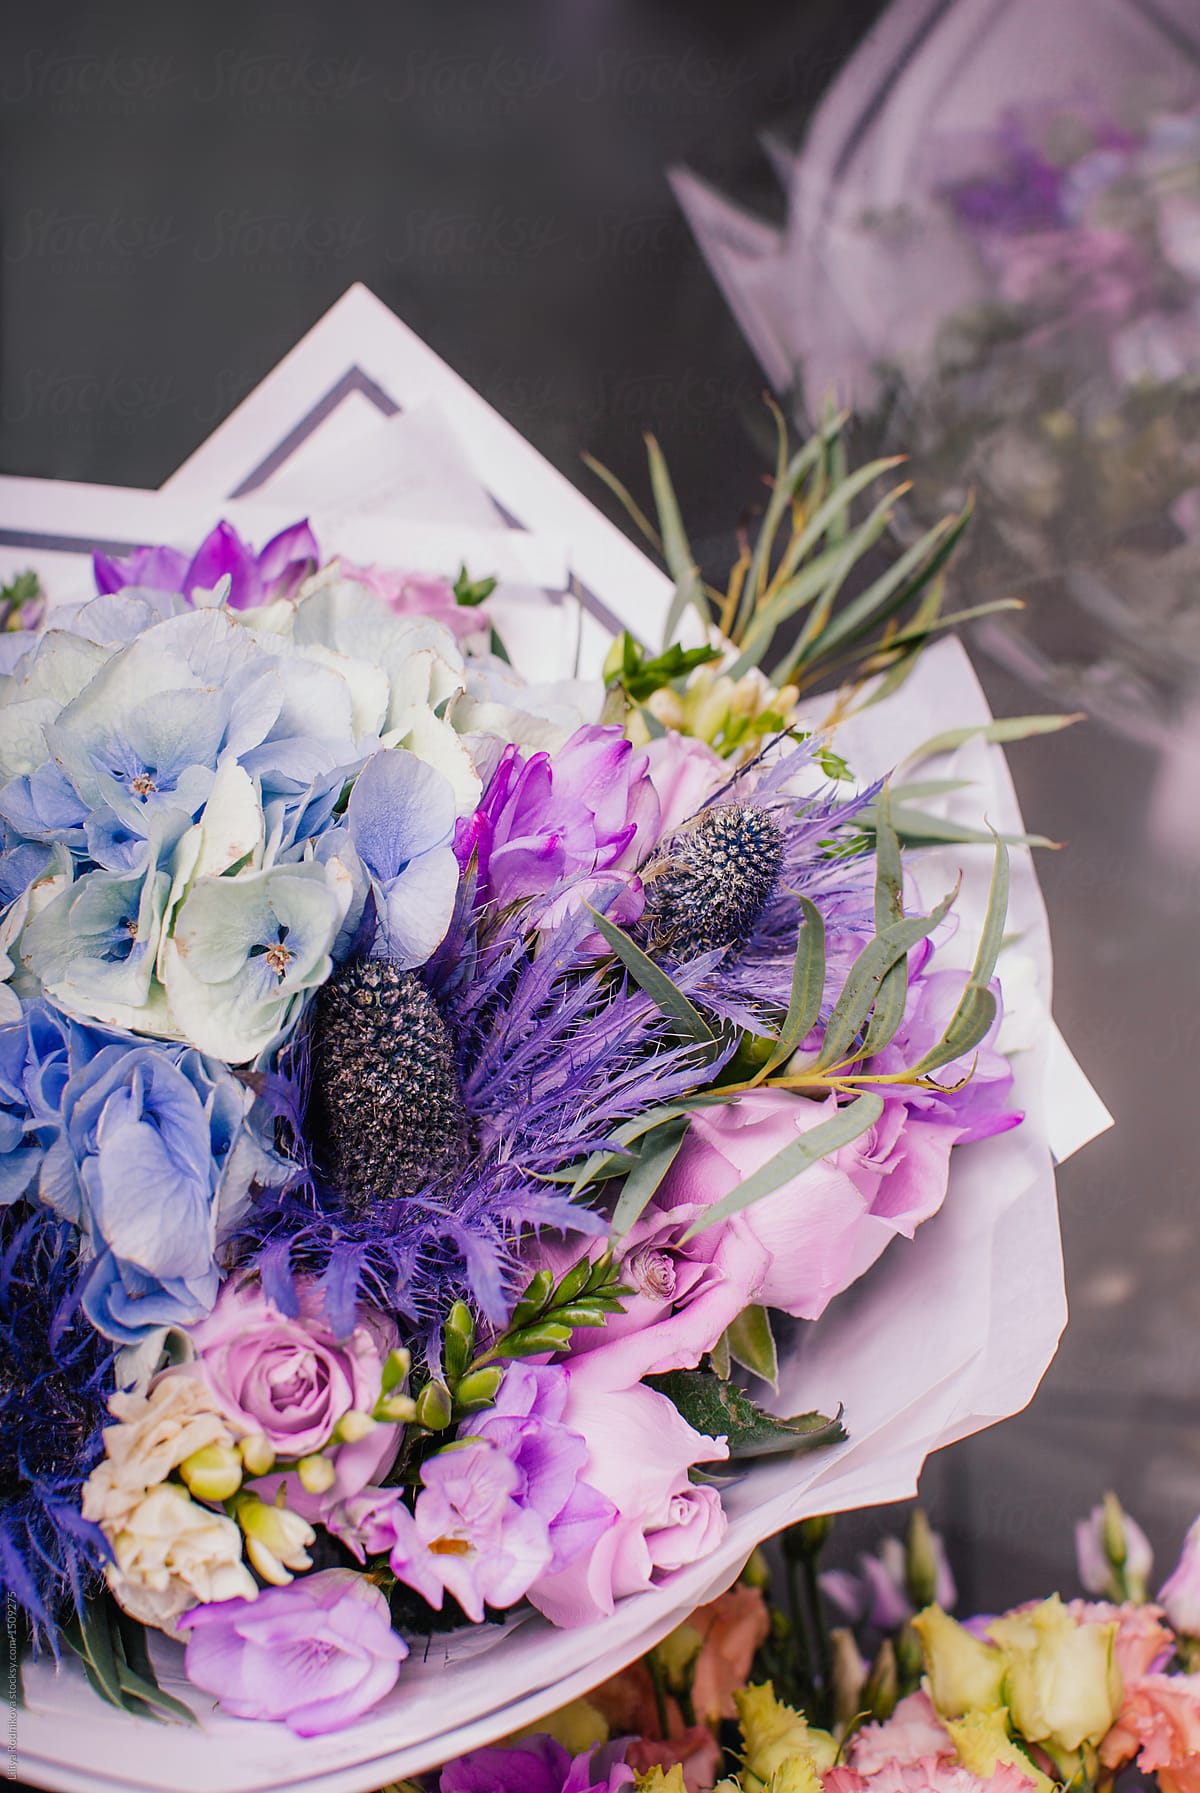 Arranged bouquet of violet flowers in package